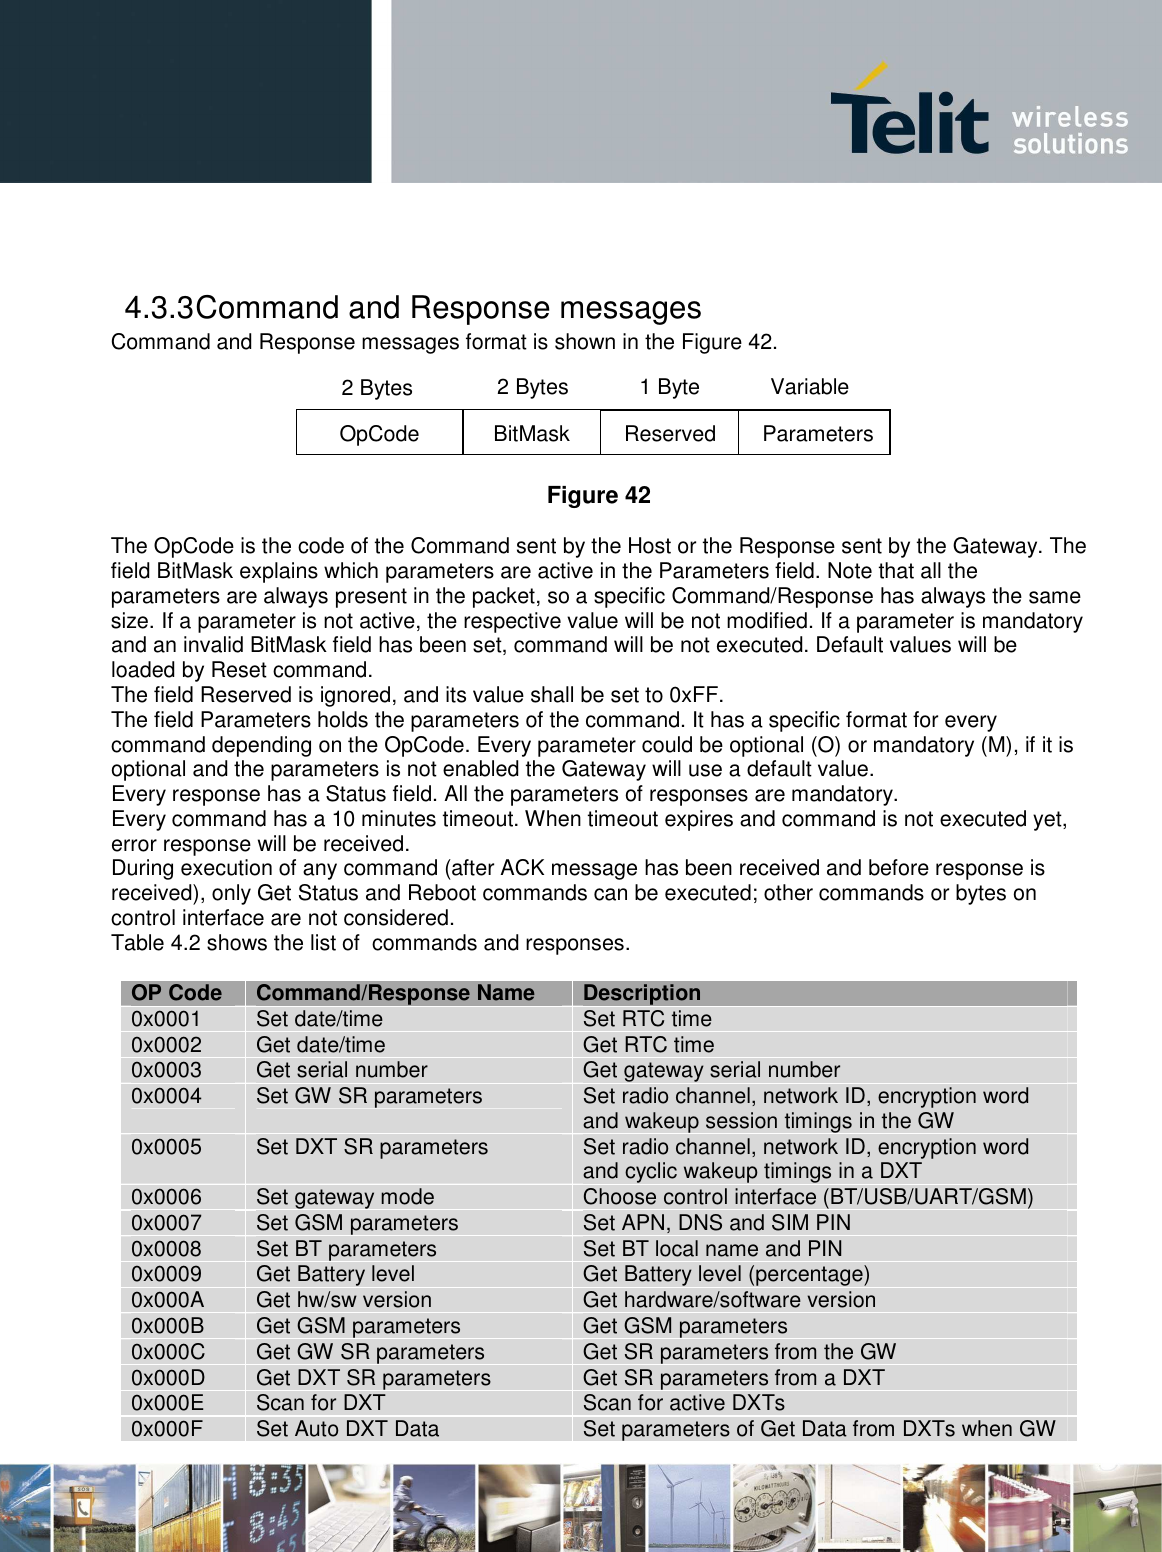        4.3.3 Command and Response messages Command and Response messages format is shown in the Figure 42.  Figure 42  The OpCode is the code of the Command sent by the Host or the Response sent by the Gateway. The field BitMask explains which parameters are active in the Parameters field. Note that all the parameters are always present in the packet, so a specific Command/Response has always the same size. If a parameter is not active, the respective value will be not modified. If a parameter is mandatory and an invalid BitMask field has been set, command will be not executed. Default values will be loaded by Reset command.   The field Reserved is ignored, and its value shall be set to 0xFF. The field Parameters holds the parameters of the command. It has a specific format for every command depending on the OpCode. Every parameter could be optional (O) or mandatory (M), if it is optional and the parameters is not enabled the Gateway will use a default value. Every response has a Status field. All the parameters of responses are mandatory. Every command has a 10 minutes timeout. When timeout expires and command is not executed yet, error response will be received. During execution of any command (after ACK message has been received and before response is received), only Get Status and Reboot commands can be executed; other commands or bytes on control interface are not considered. Table 4.2 shows the list of  commands and responses.  OP Code  Command/Response Name  Description 0x0001  Set date/time  Set RTC time 0x0002  Get date/time  Get RTC time 0x0003  Get serial number  Get gateway serial number 0x0004  Set GW SR parameters  Set radio channel, network ID, encryption word and wakeup session timings in the GW 0x0005  Set DXT SR parameters  Set radio channel, network ID, encryption word and cyclic wakeup timings in a DXT 0x0006  Set gateway mode  Choose control interface (BT/USB/UART/GSM) 0x0007  Set GSM parameters  Set APN, DNS and SIM PIN 0x0008  Set BT parameters Set BT local name and PIN 0x0009  Get Battery level  Get Battery level (percentage) 0x000A  Get hw/sw version  Get hardware/software version 0x000B  Get GSM parameters  Get GSM parameters 0x000C  Get GW SR parameters  Get SR parameters from the GW 0x000D Get DXT SR parameters Get SR parameters from a DXT 0x000E  Scan for DXT  Scan for active DXTs 0x000F  Set Auto DXT Data  Set parameters of Get Data from DXTs when GW 2 Bytes OpCode  BitMask  Reserved 2 Bytes  1 Byte Parameters Variable 